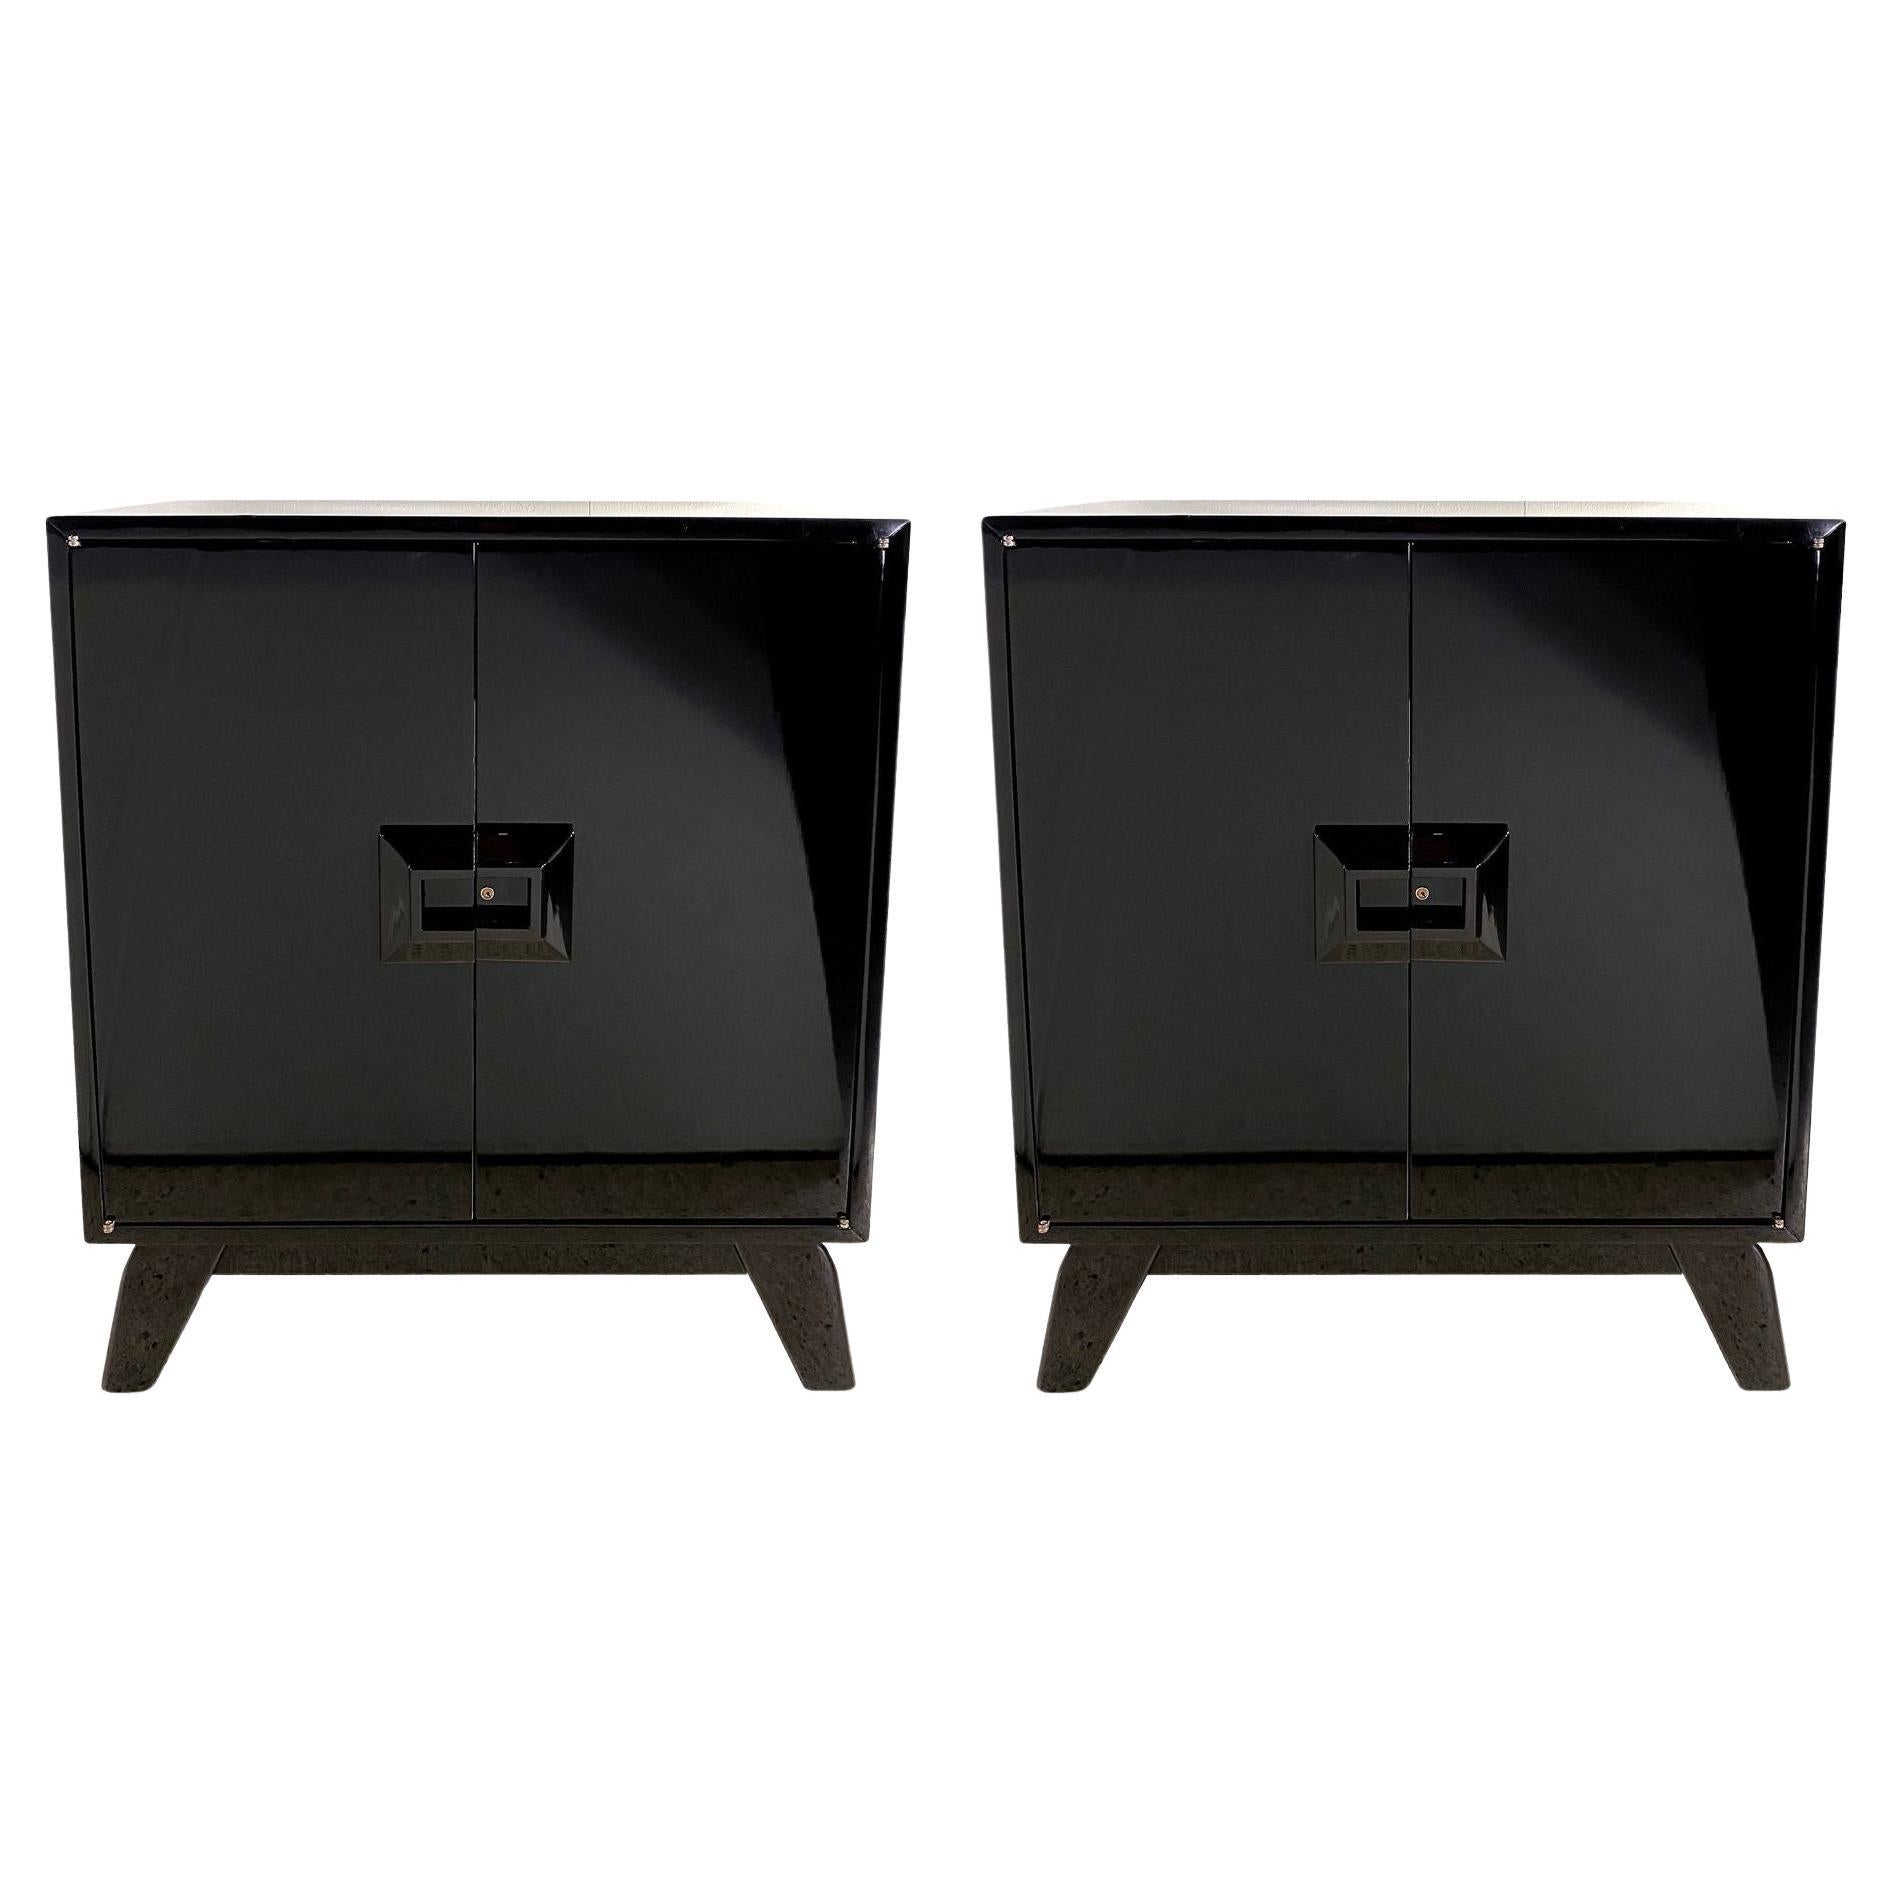 Pair of Italian Black Lacquer Modern Cabinets, Renzo Rutili For Sale